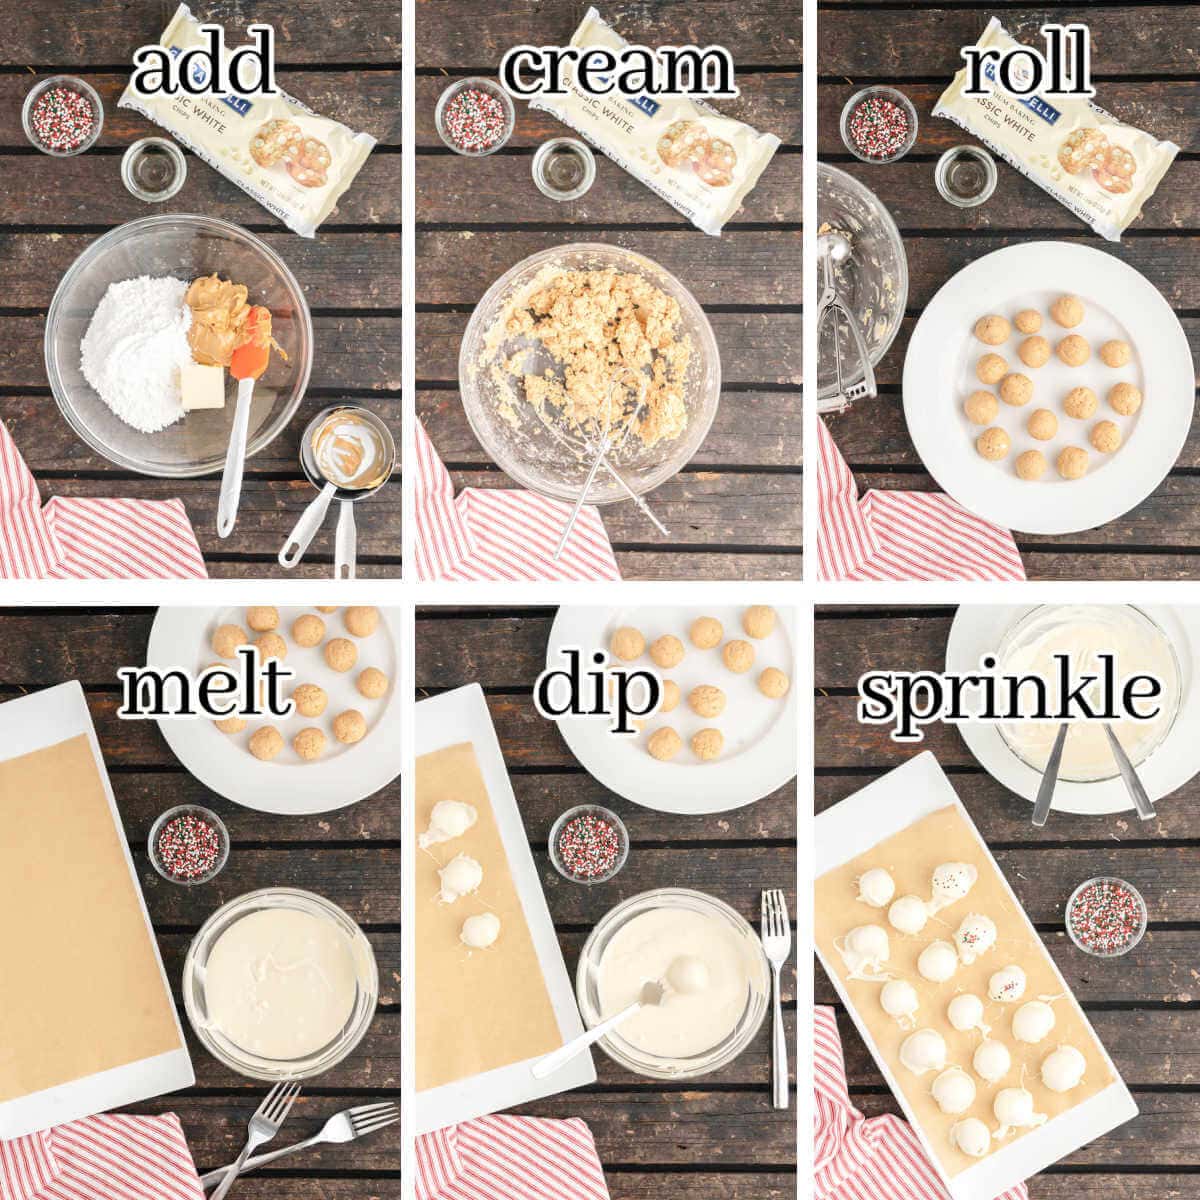 Instructions to make holiday candy recipe, with print overlay.